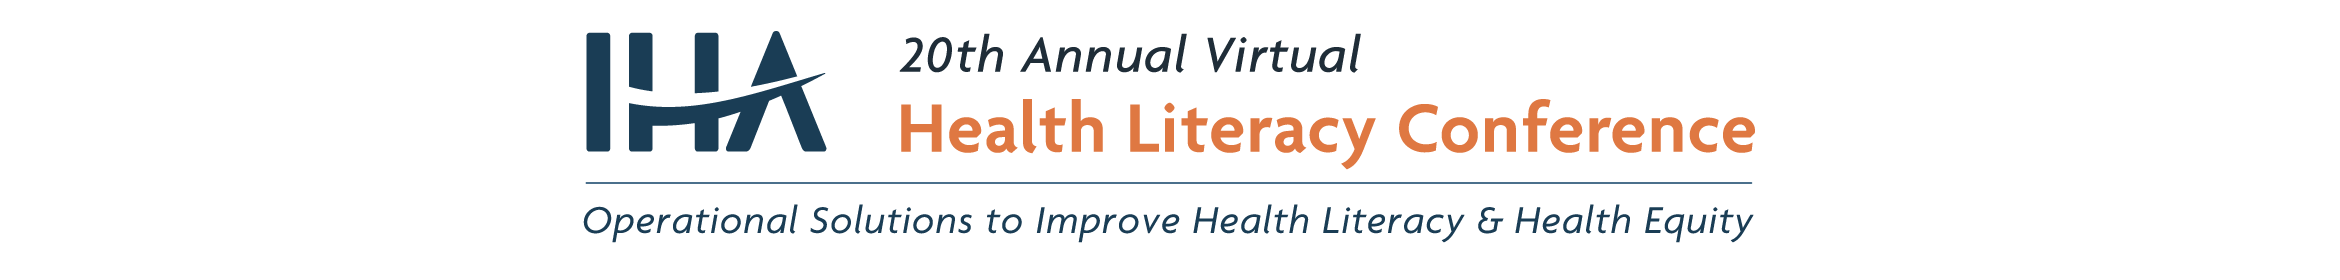 IHA's 20th Annual Health Literacy Conference